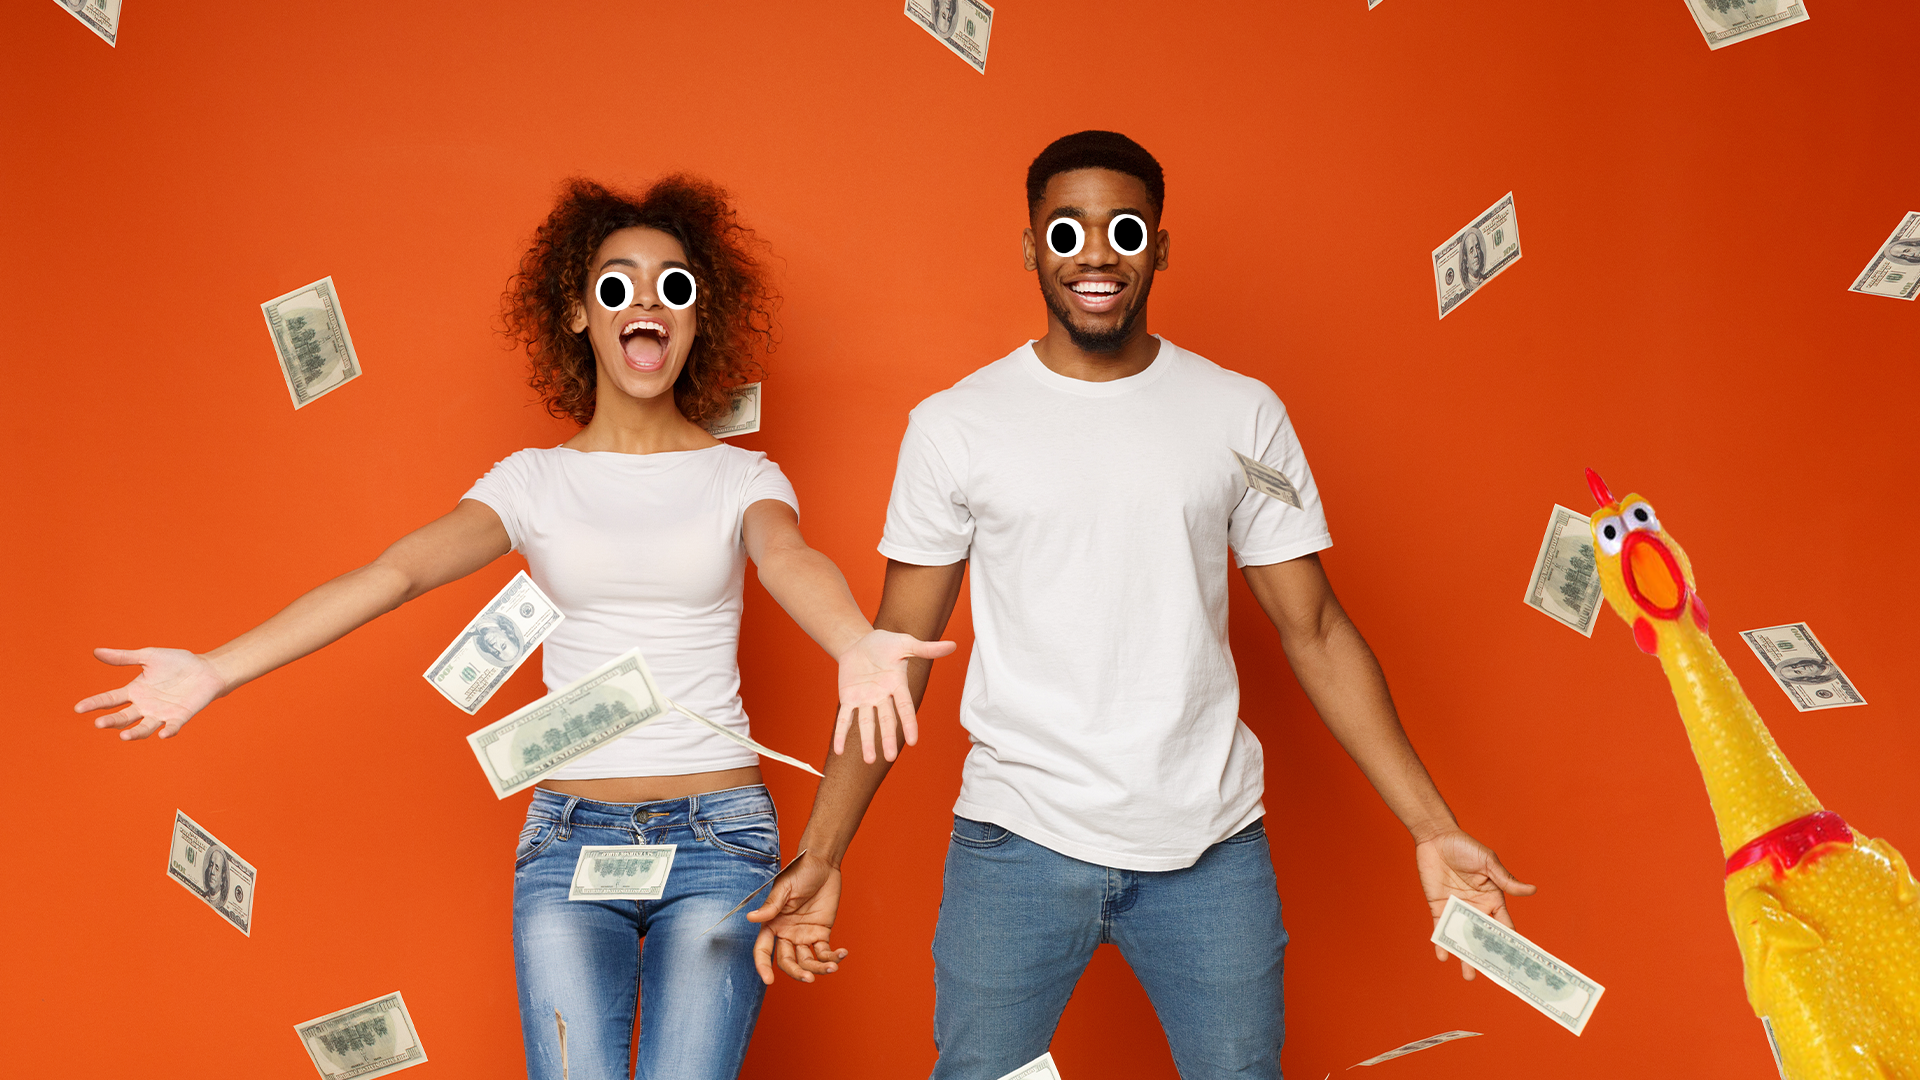 Man and woman surrounded by banknotes on orange background